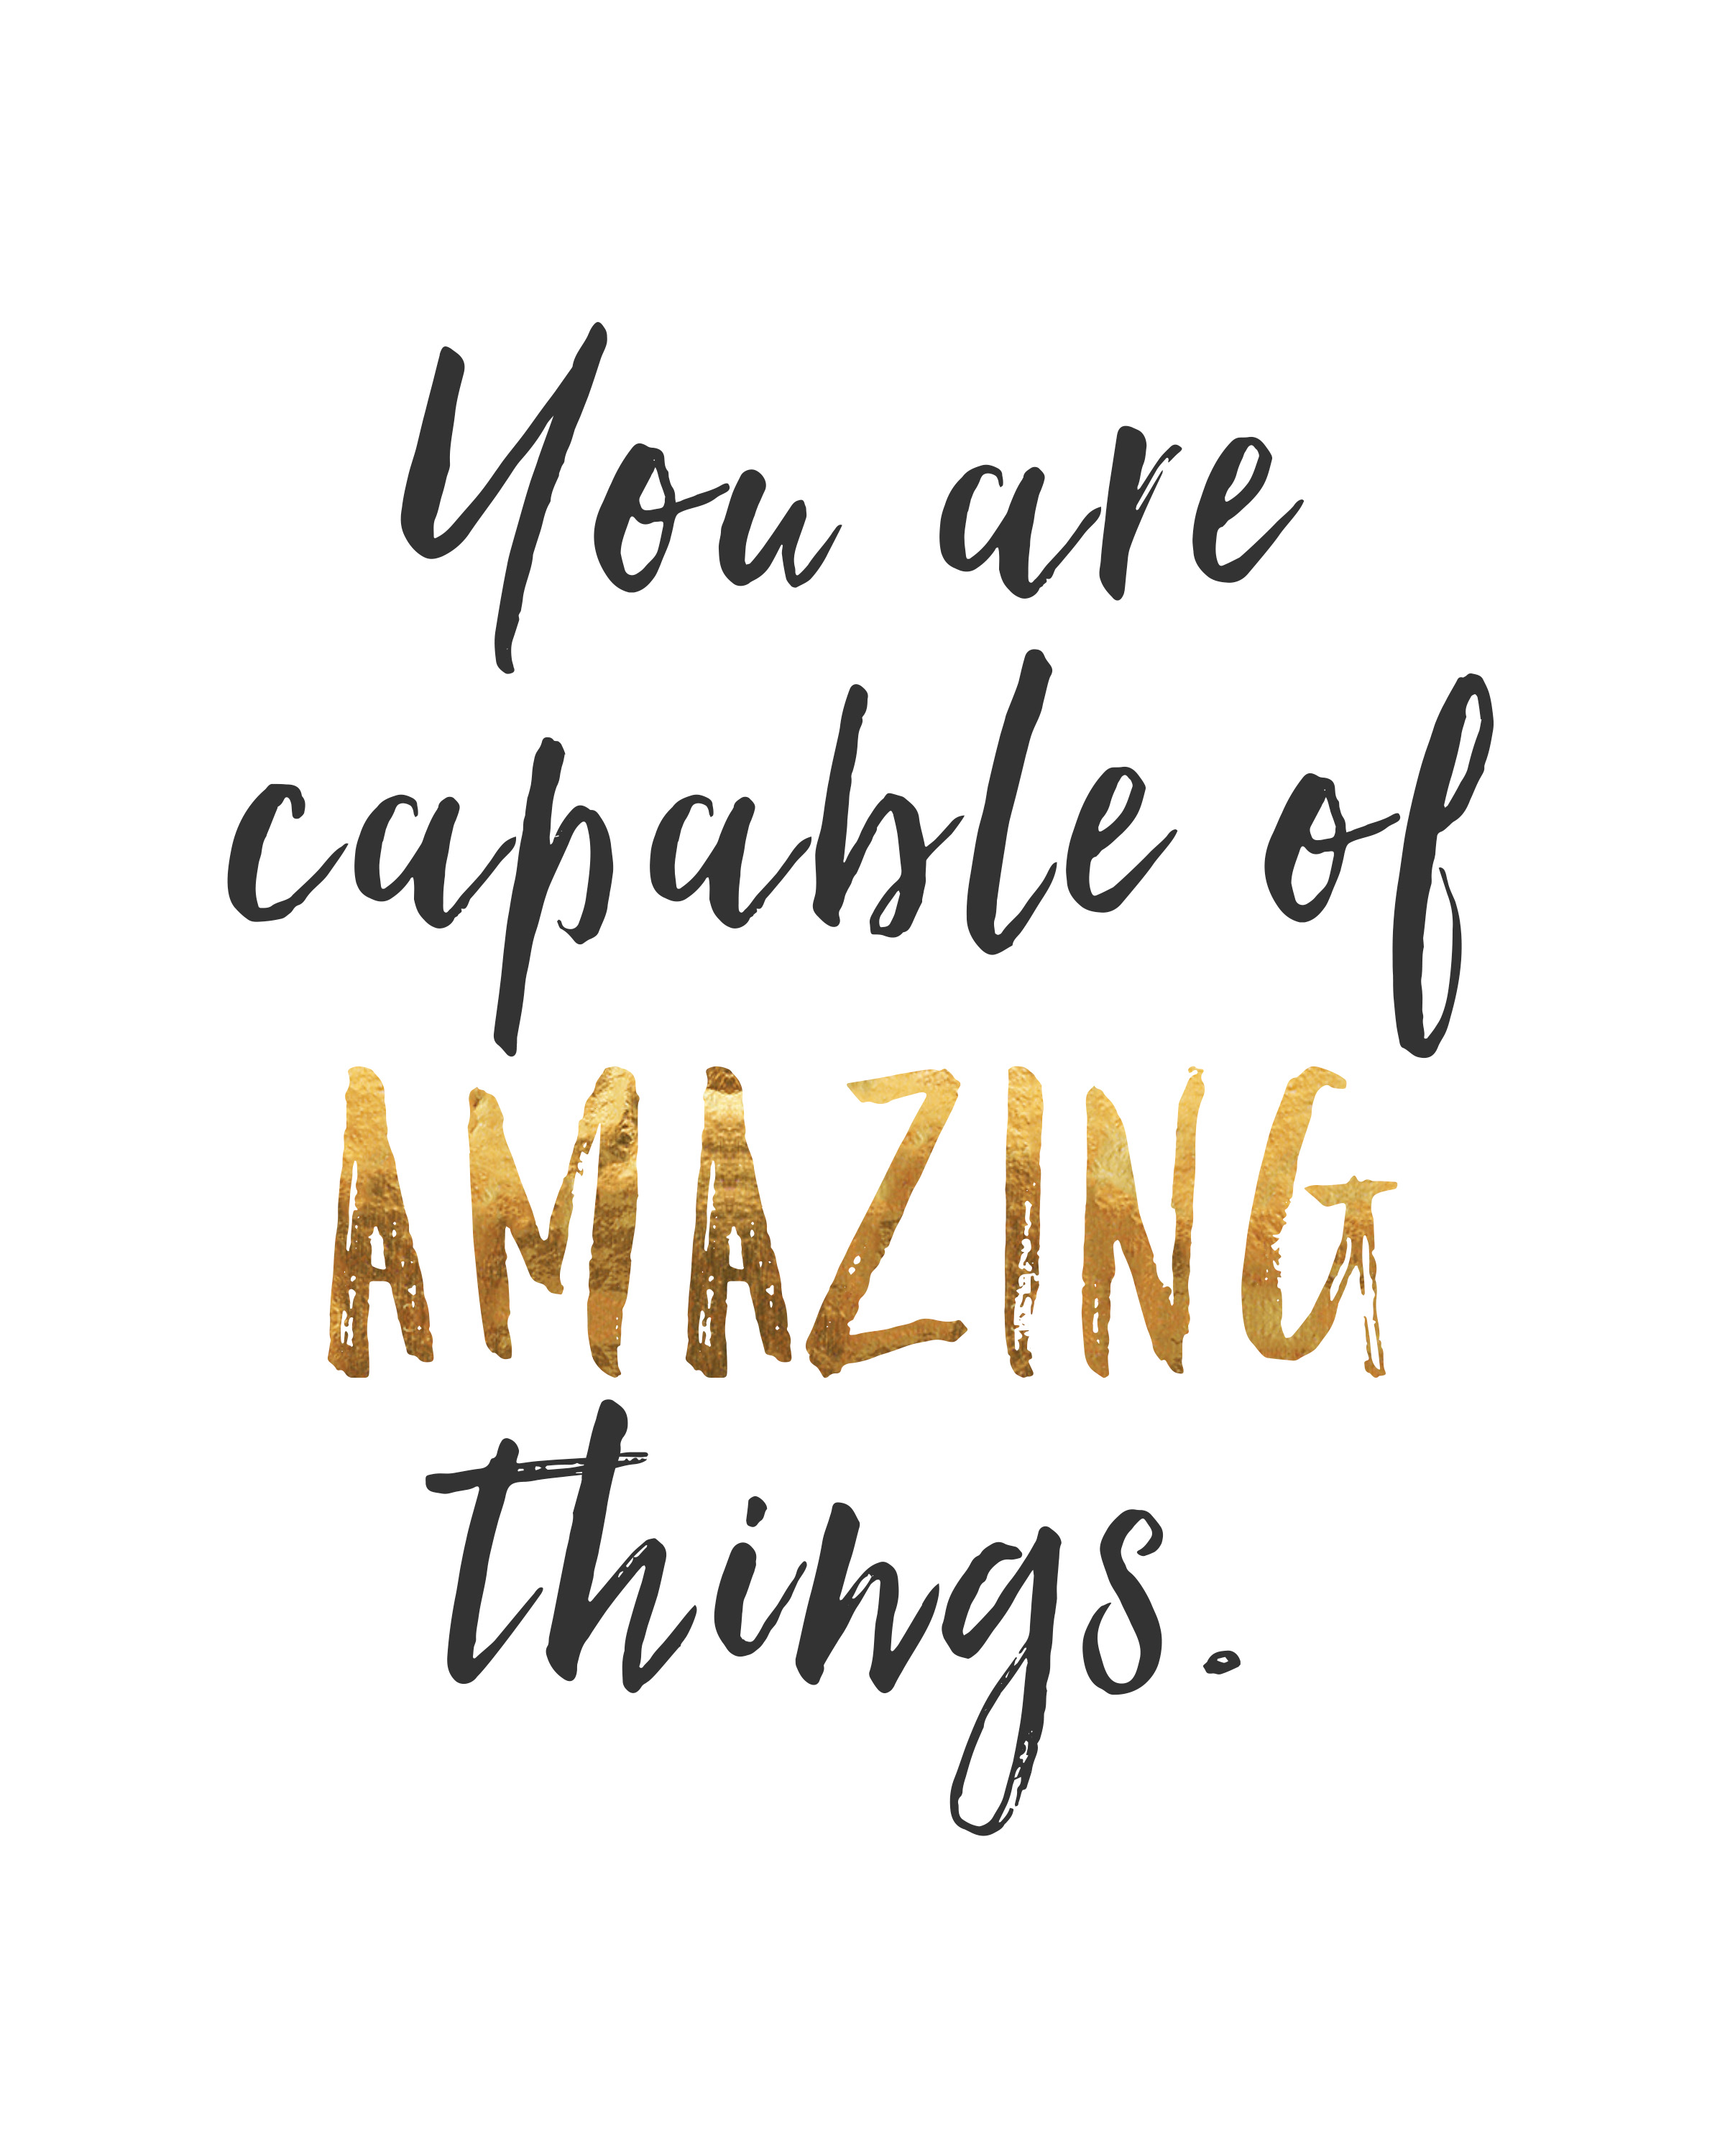 Capable of Amazing Things